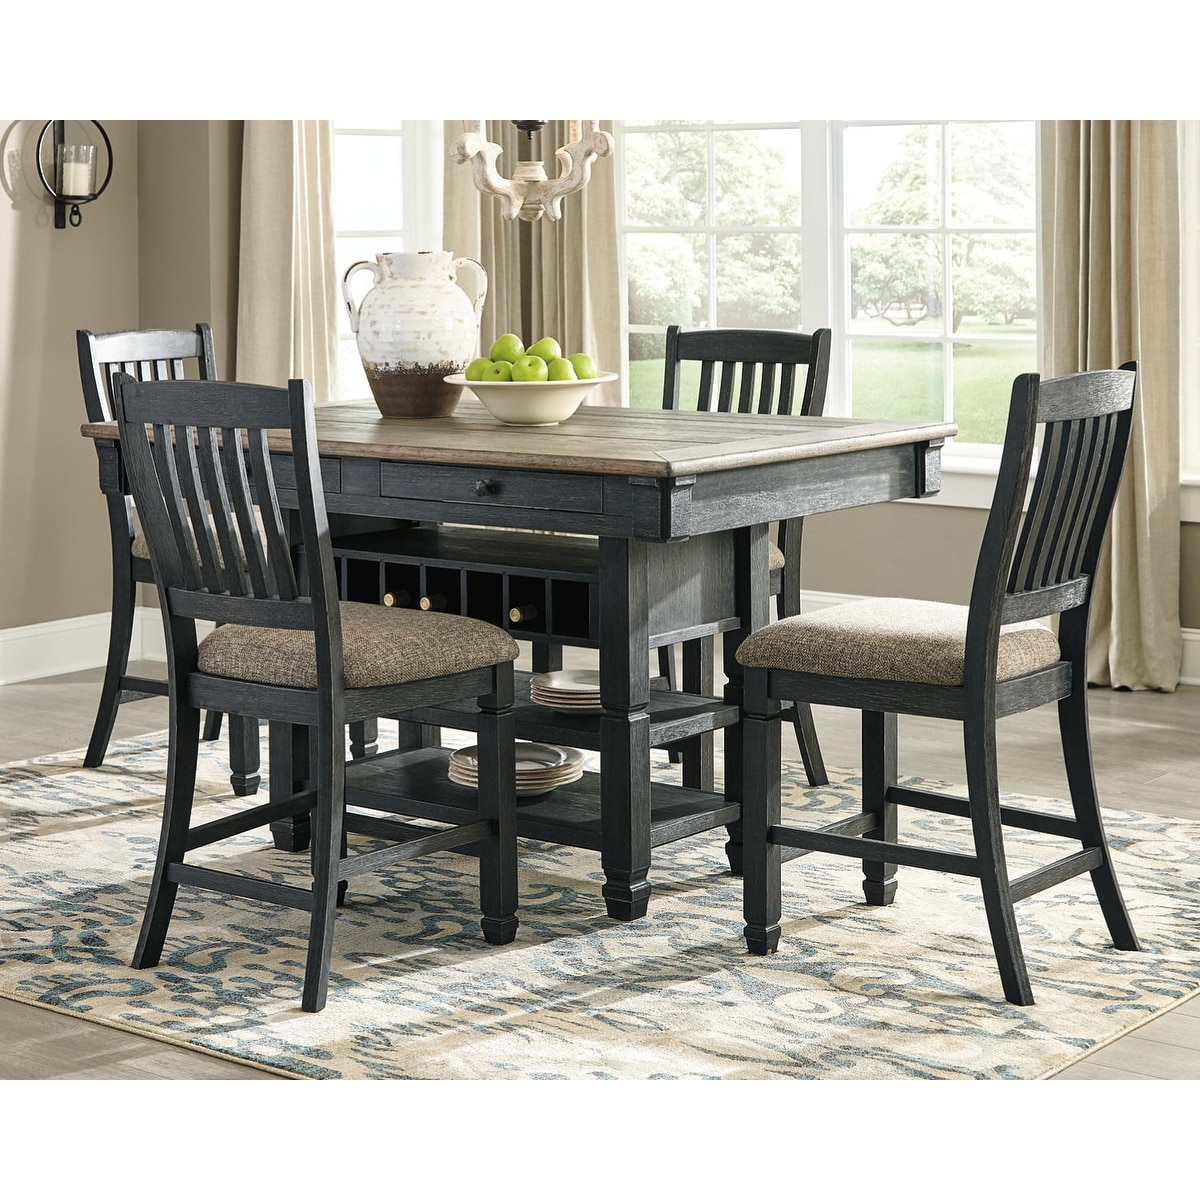 Signature Design by Ashley Tyler Creek Counter Height Dining Room Table - Black/Gray -  D736-32